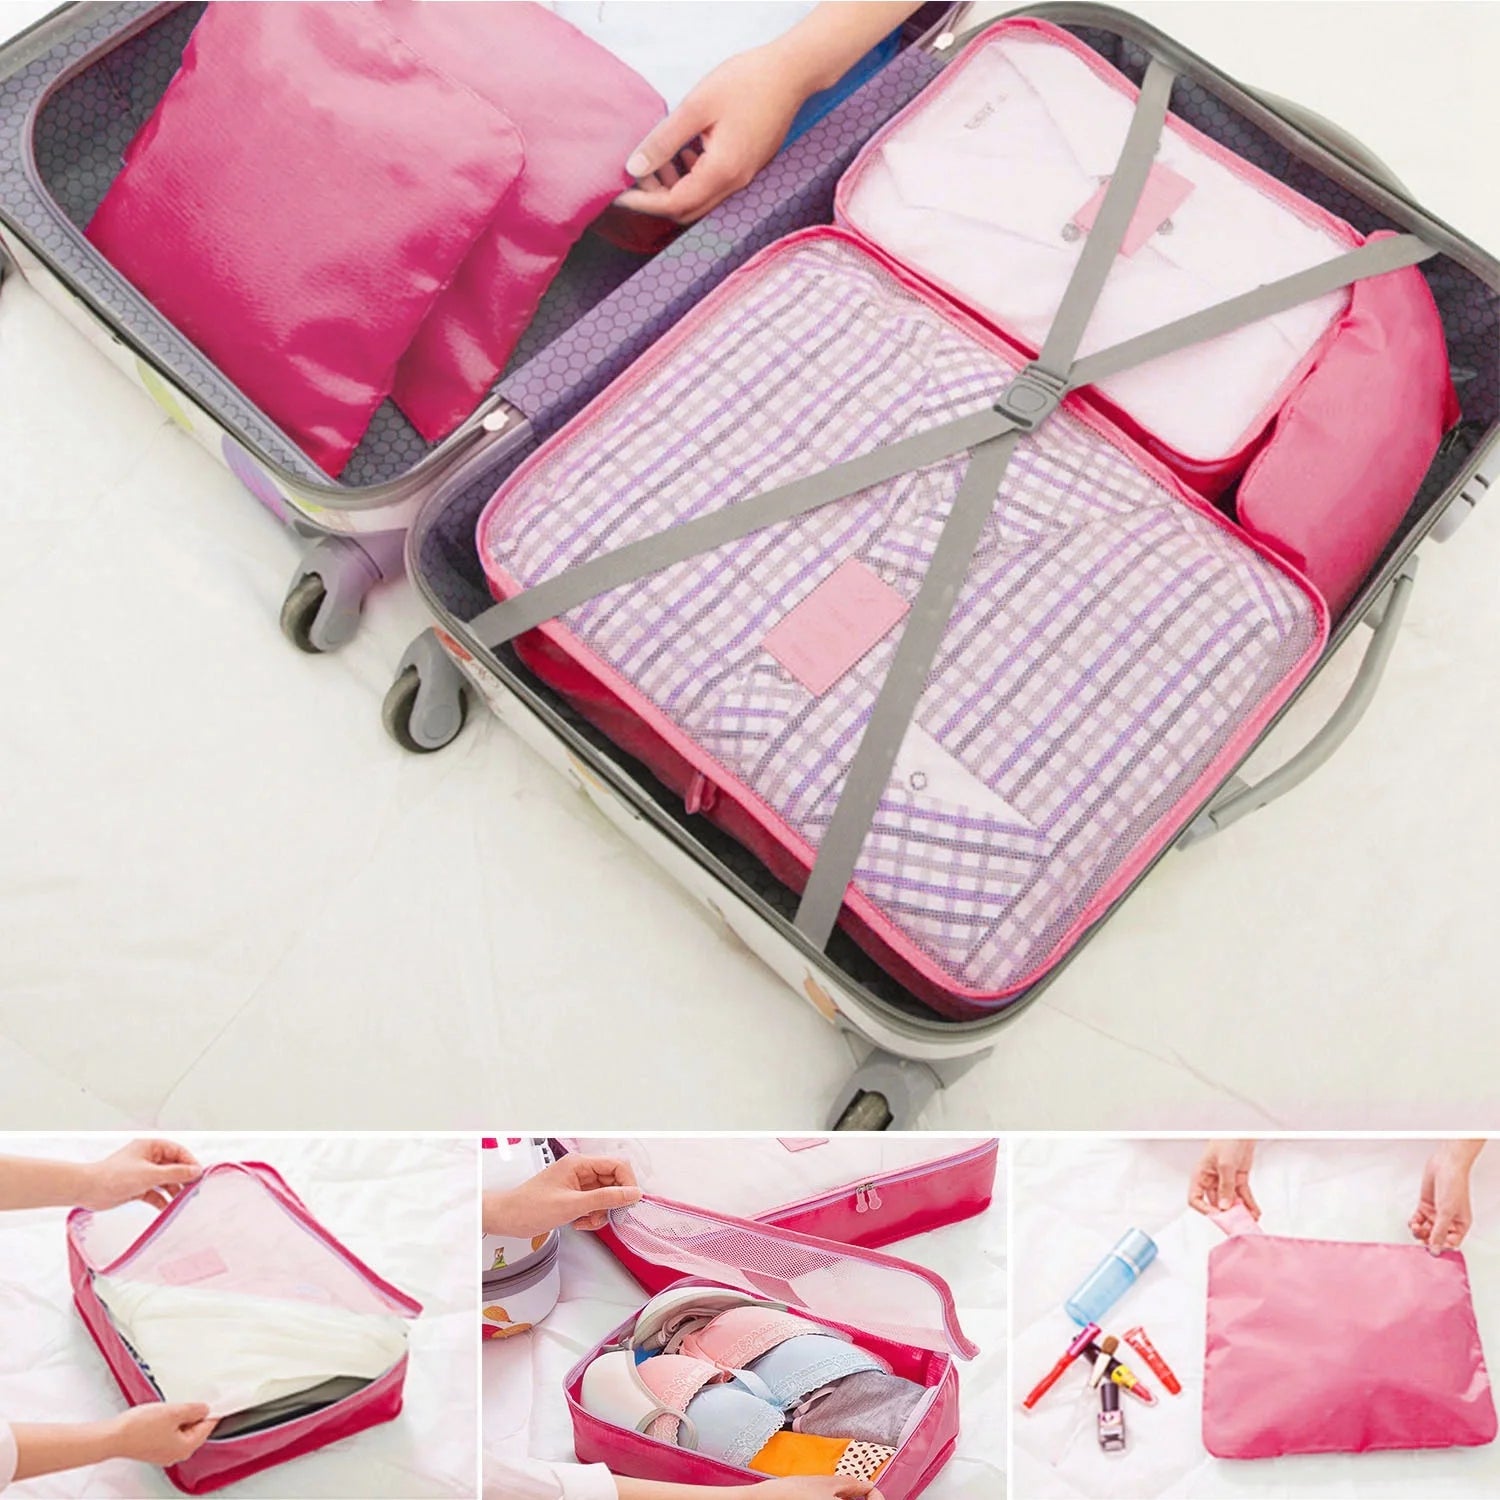 Clothes Storage Travel Bags Organizer for Luggage Packing Bags for Suitcases - Packing Cubes for Carry on Suitcase - 9 Pieces